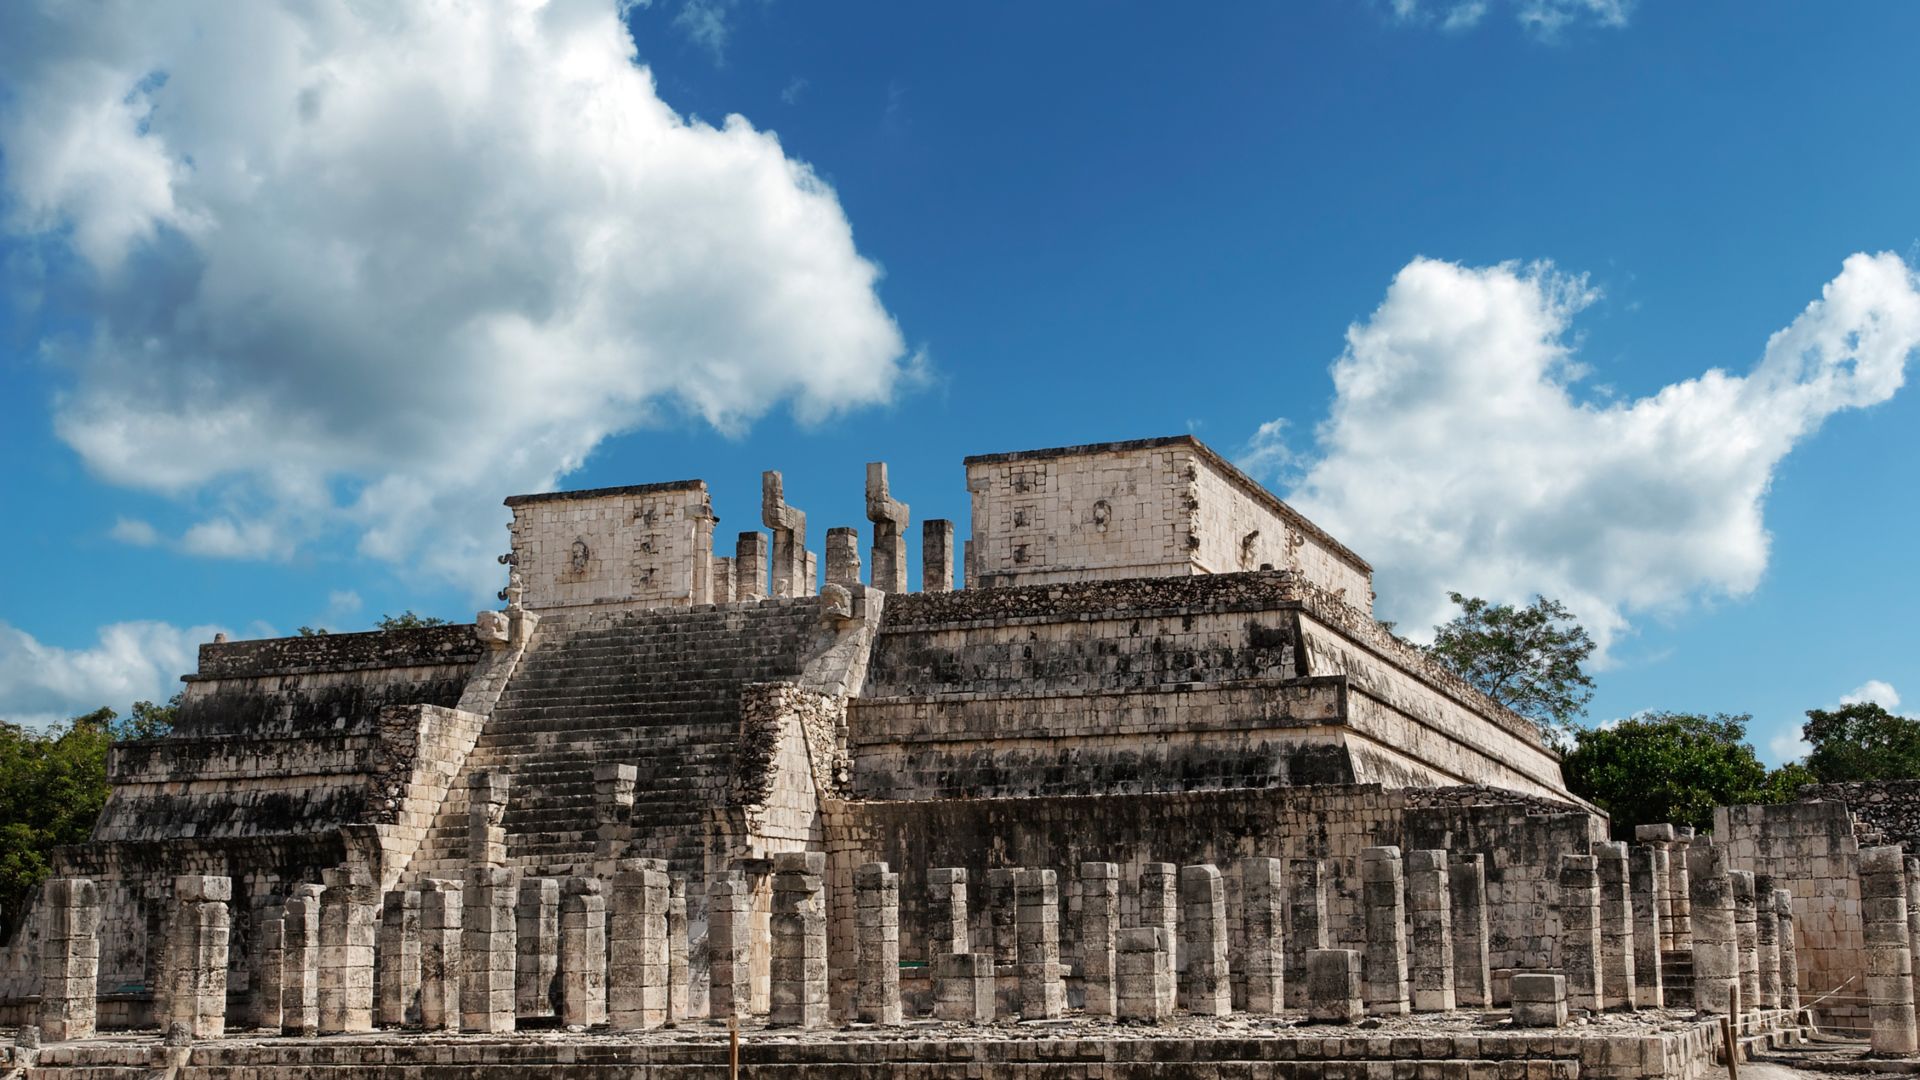 A Stone Building With A Grass Lawn With Chichen Itza In The Background